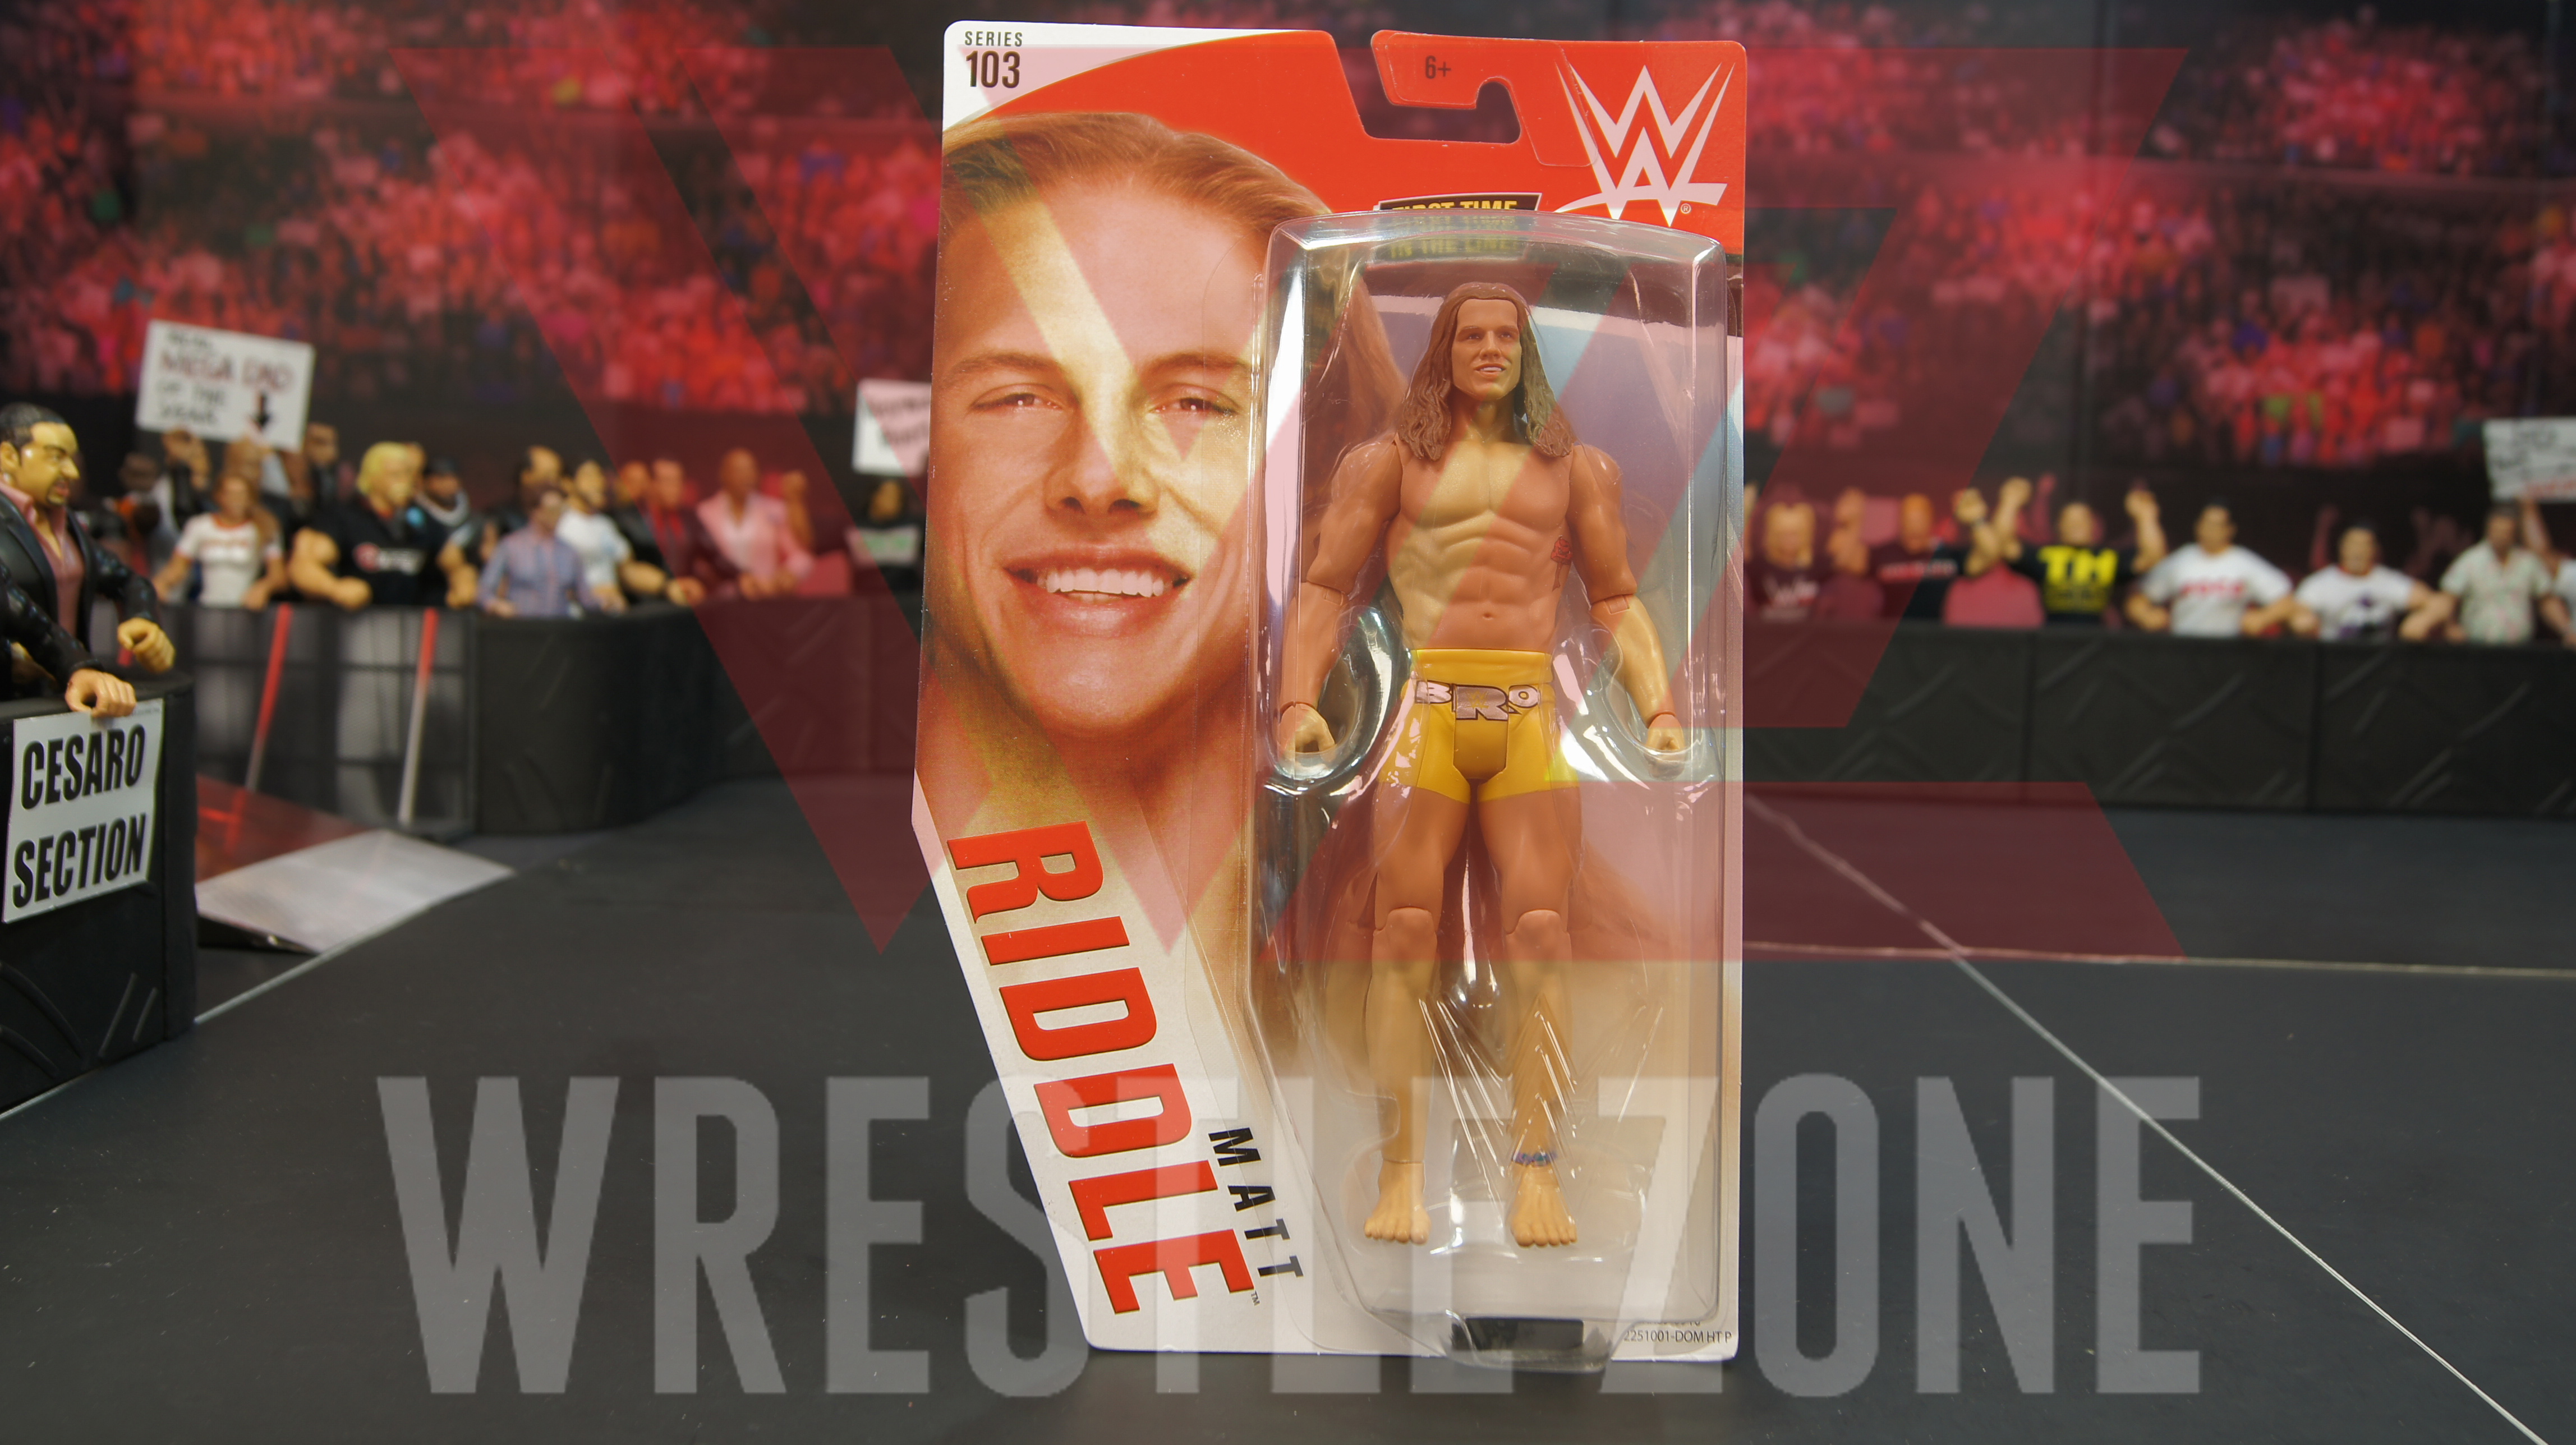 Wz_wwe_series103_riddle_a